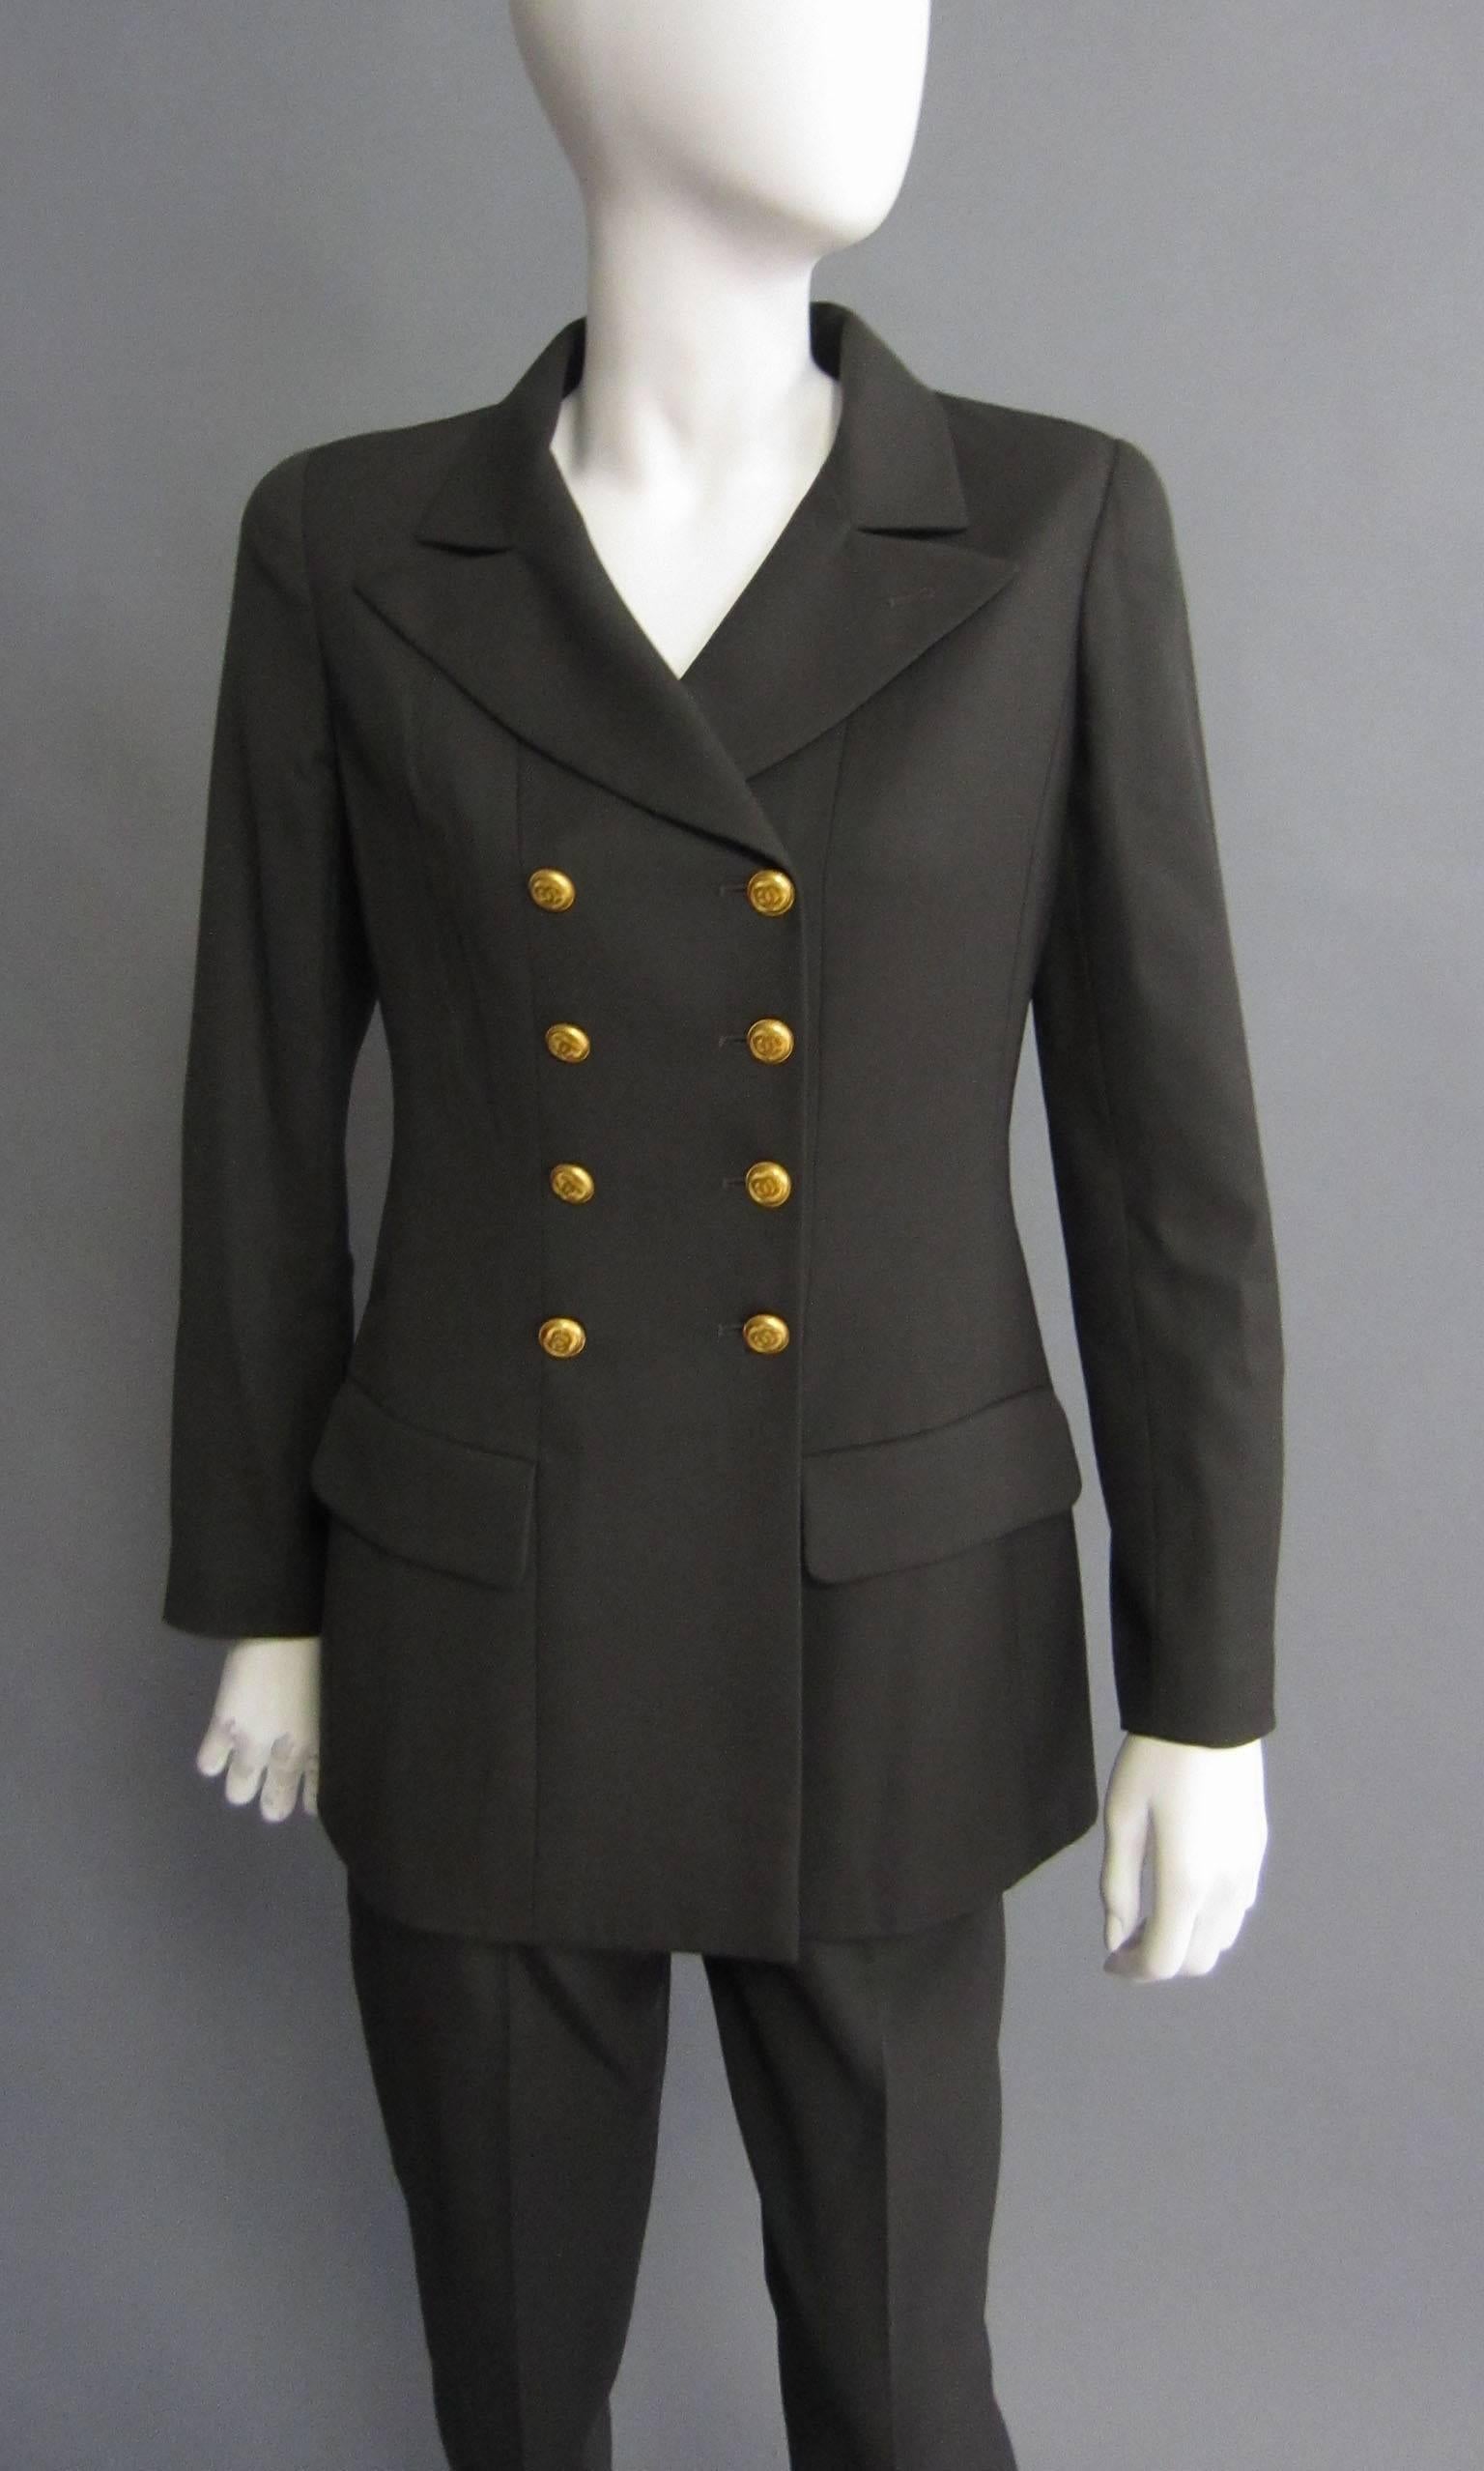 This CHANEL suit features a double breasted jacket and high waist pants. The jacket features two front pockets. The closure is accented with gold, CC logo buttons. The same buttons are repeated on the end of either sleeve. The same button secures